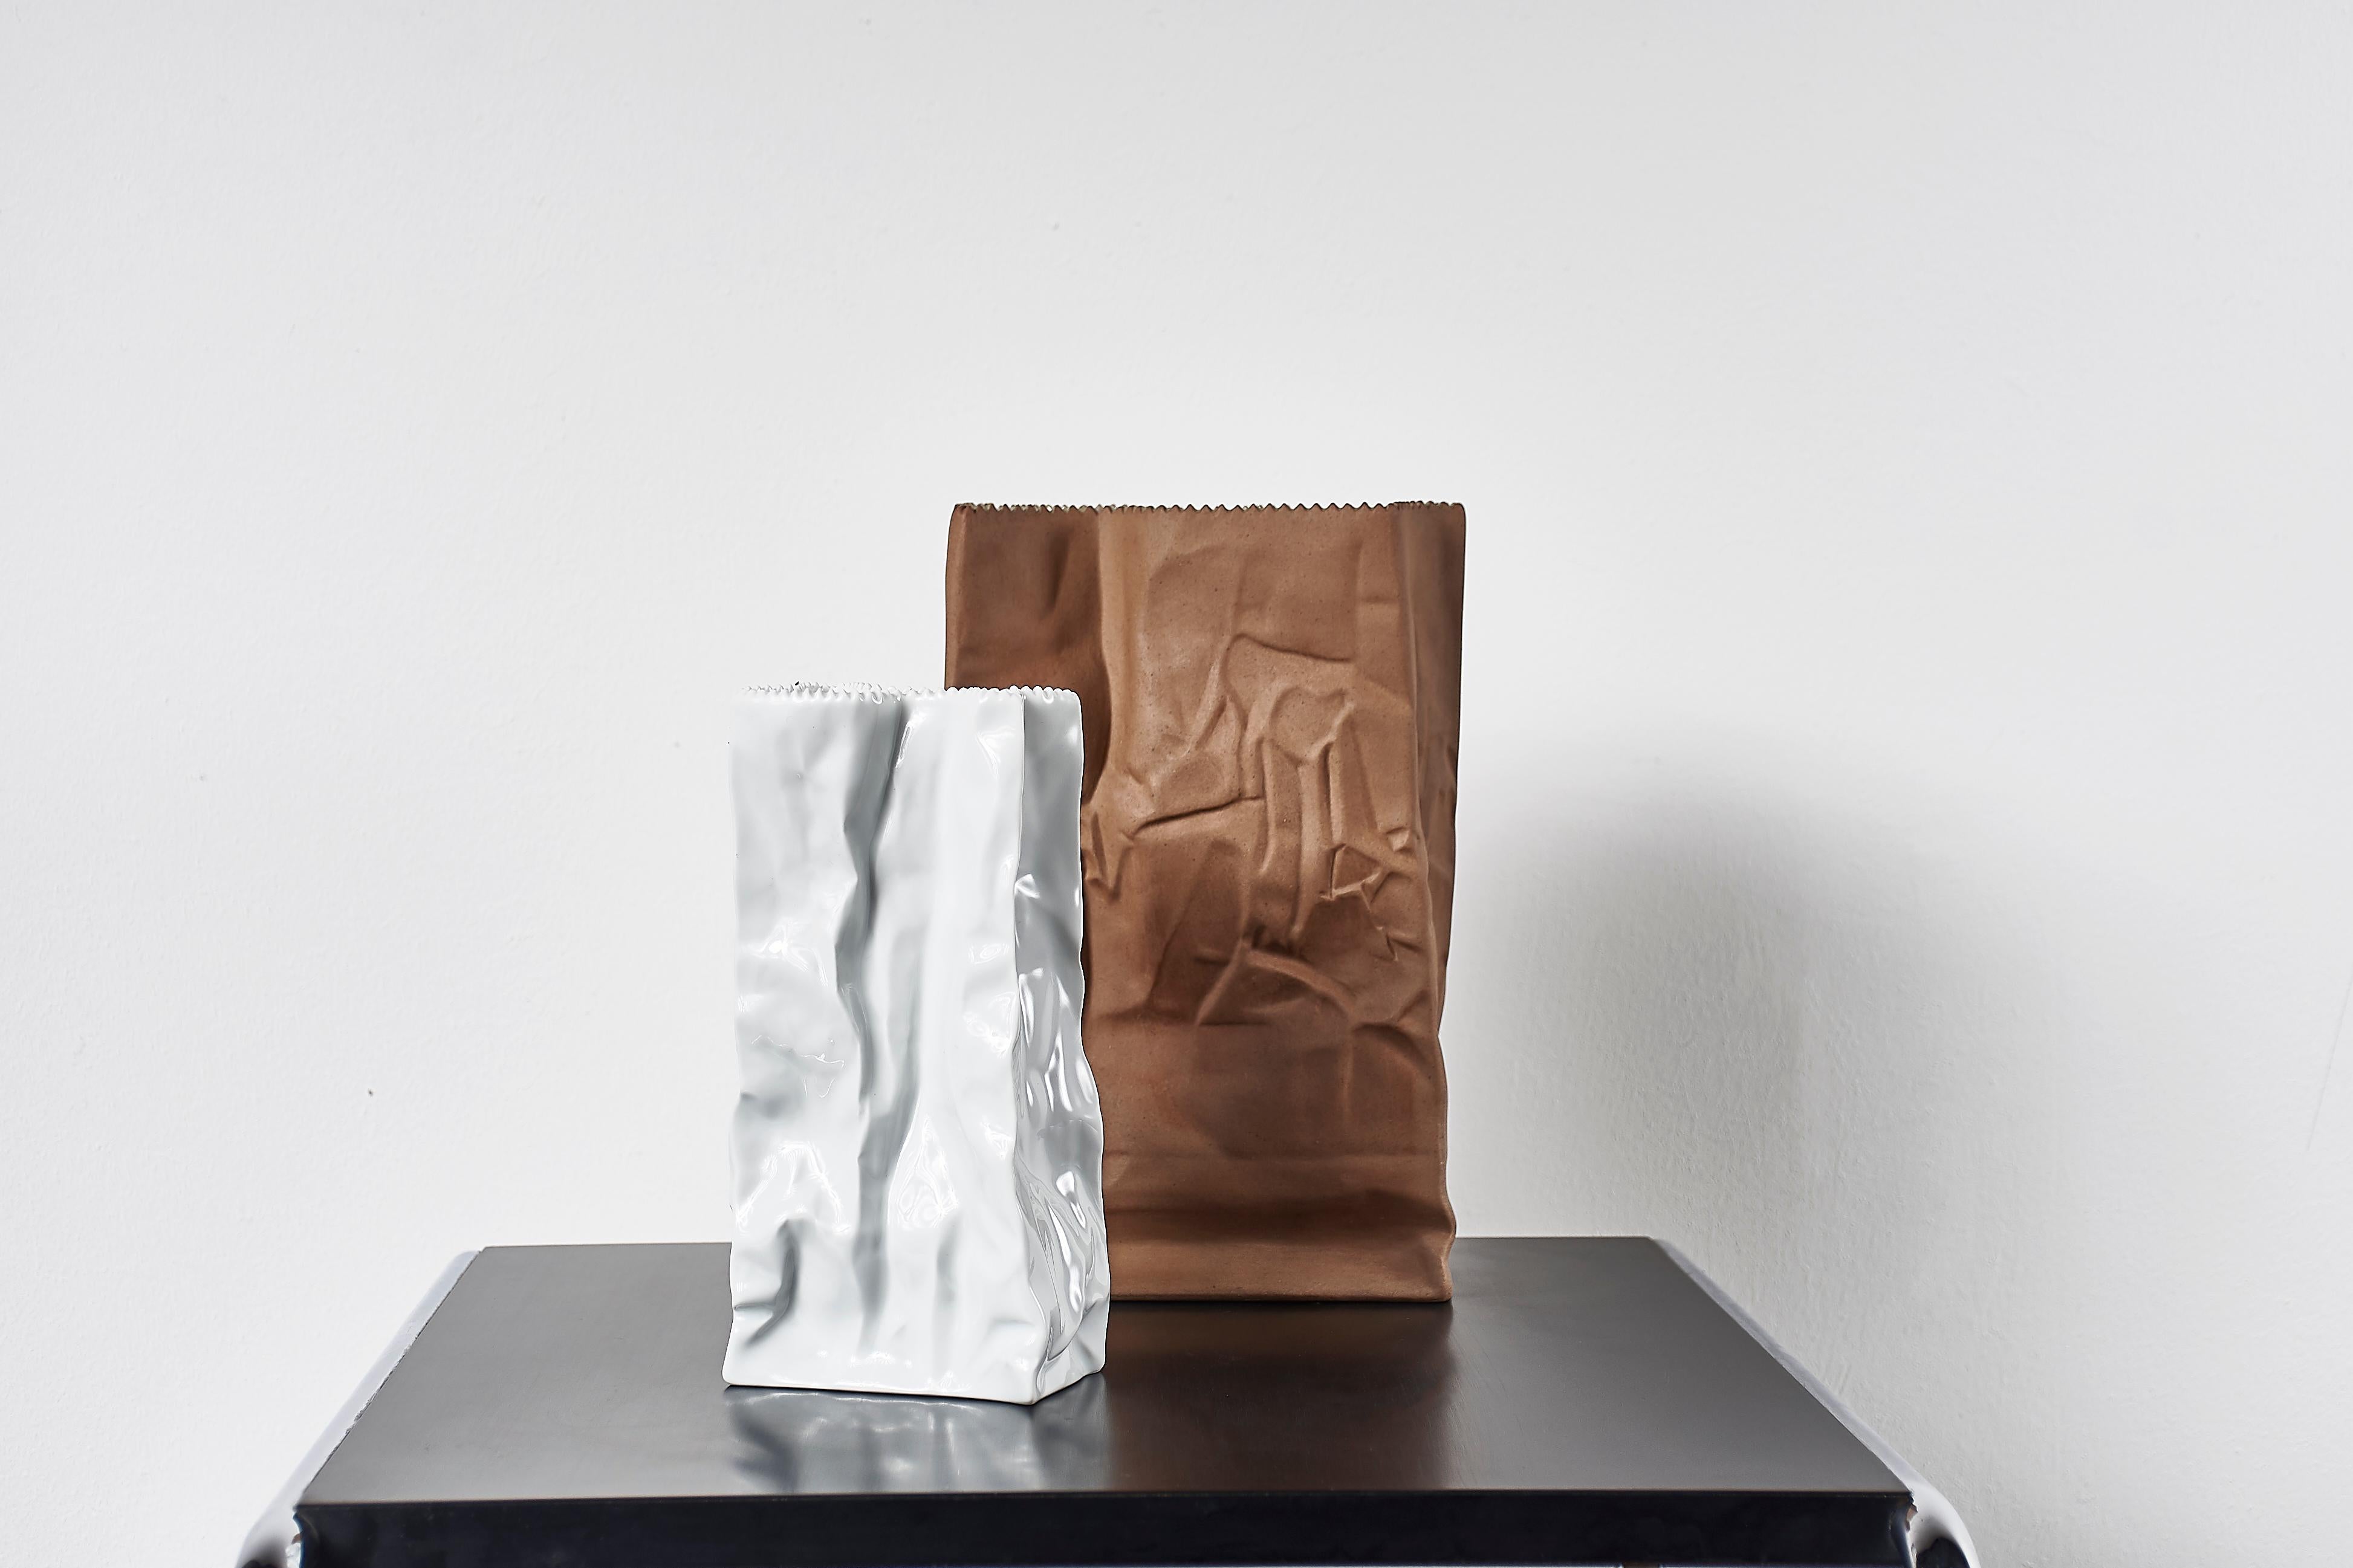 Paper or plastic or…Wirkkala’s fun and whimsical 1977 Pop Art take on tromp l’oeil, something that is not what it appears to be. Here, a used paper bag is actually a porcelain vase. Kraft paper with a serrated top edge. Perennially popular and